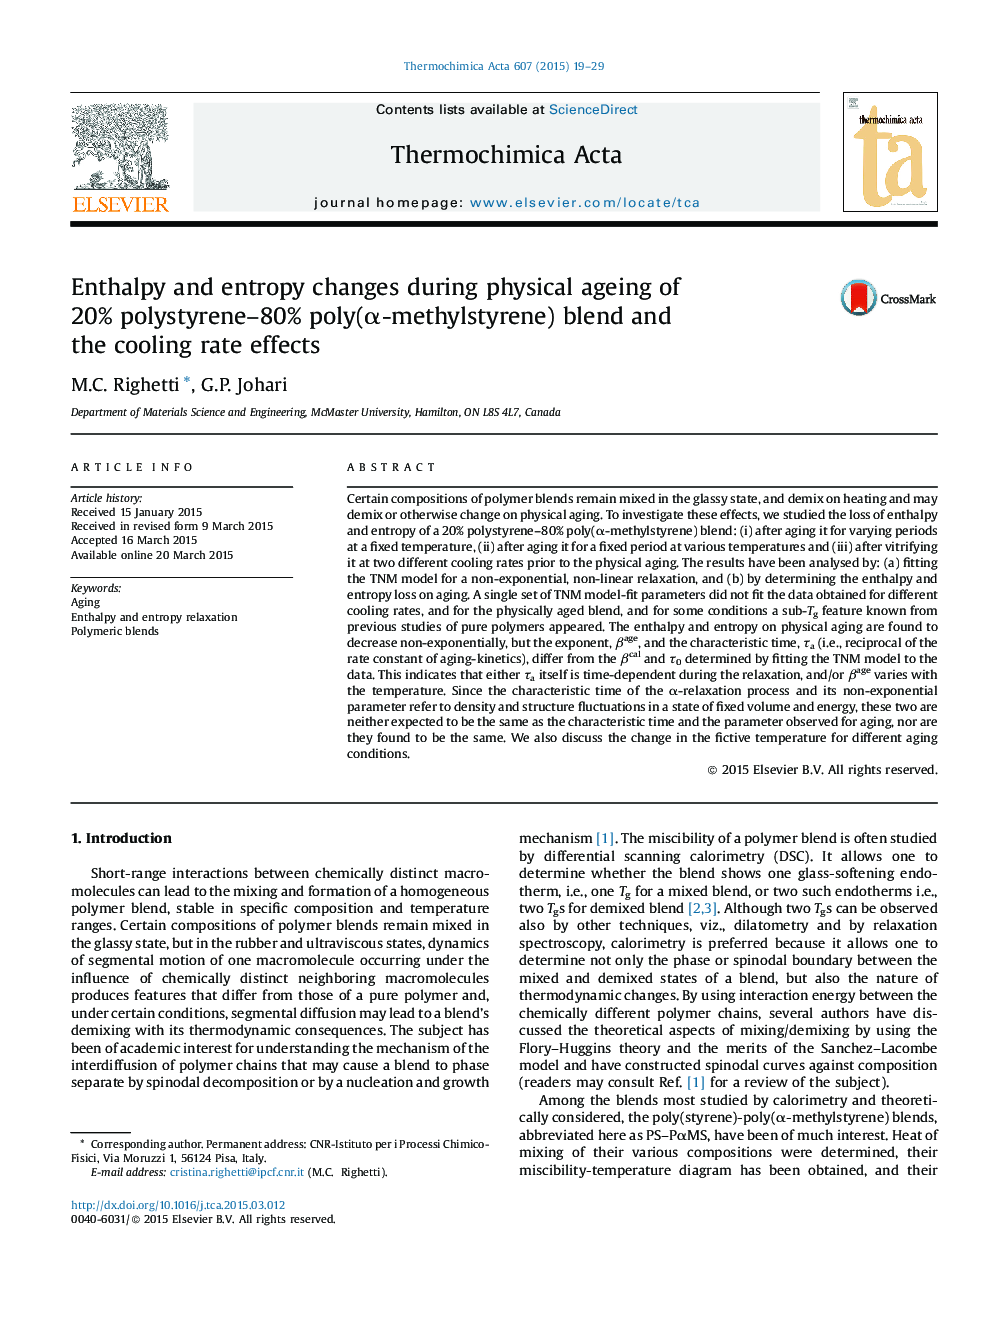 Enthalpy and entropy changes during physical ageing of 20% polystyrene–80% poly(α-methylstyrene) blend and the cooling rate effects